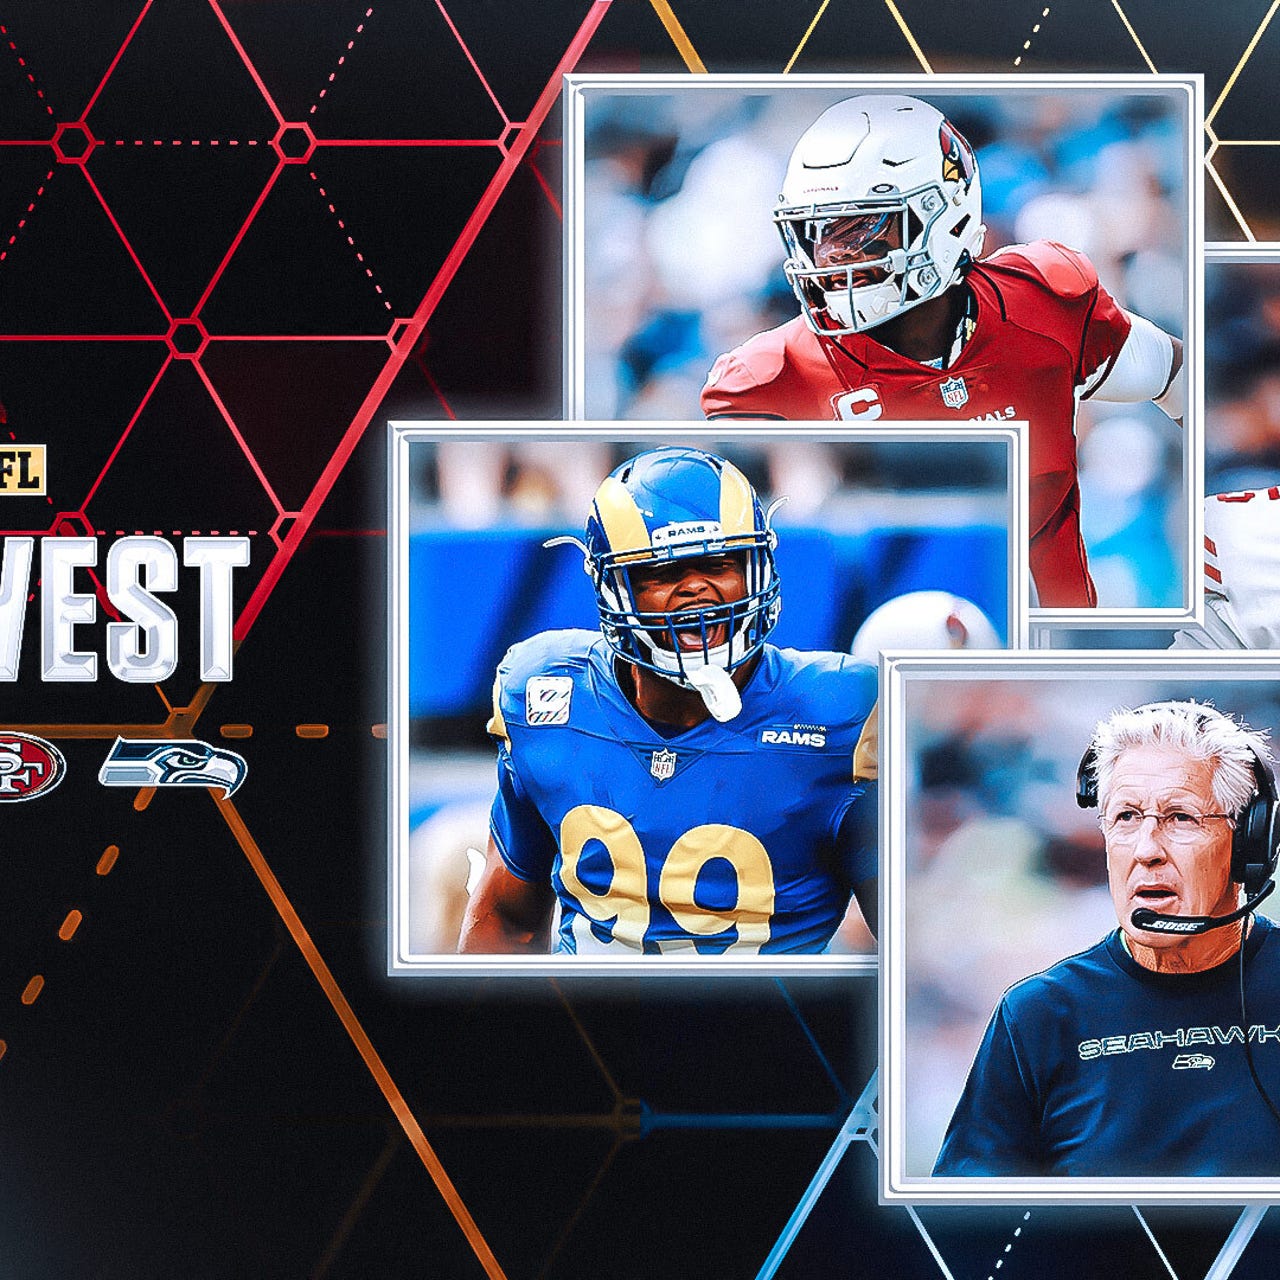 NFC West standings: What are the odds that Cardinals catch Rams?